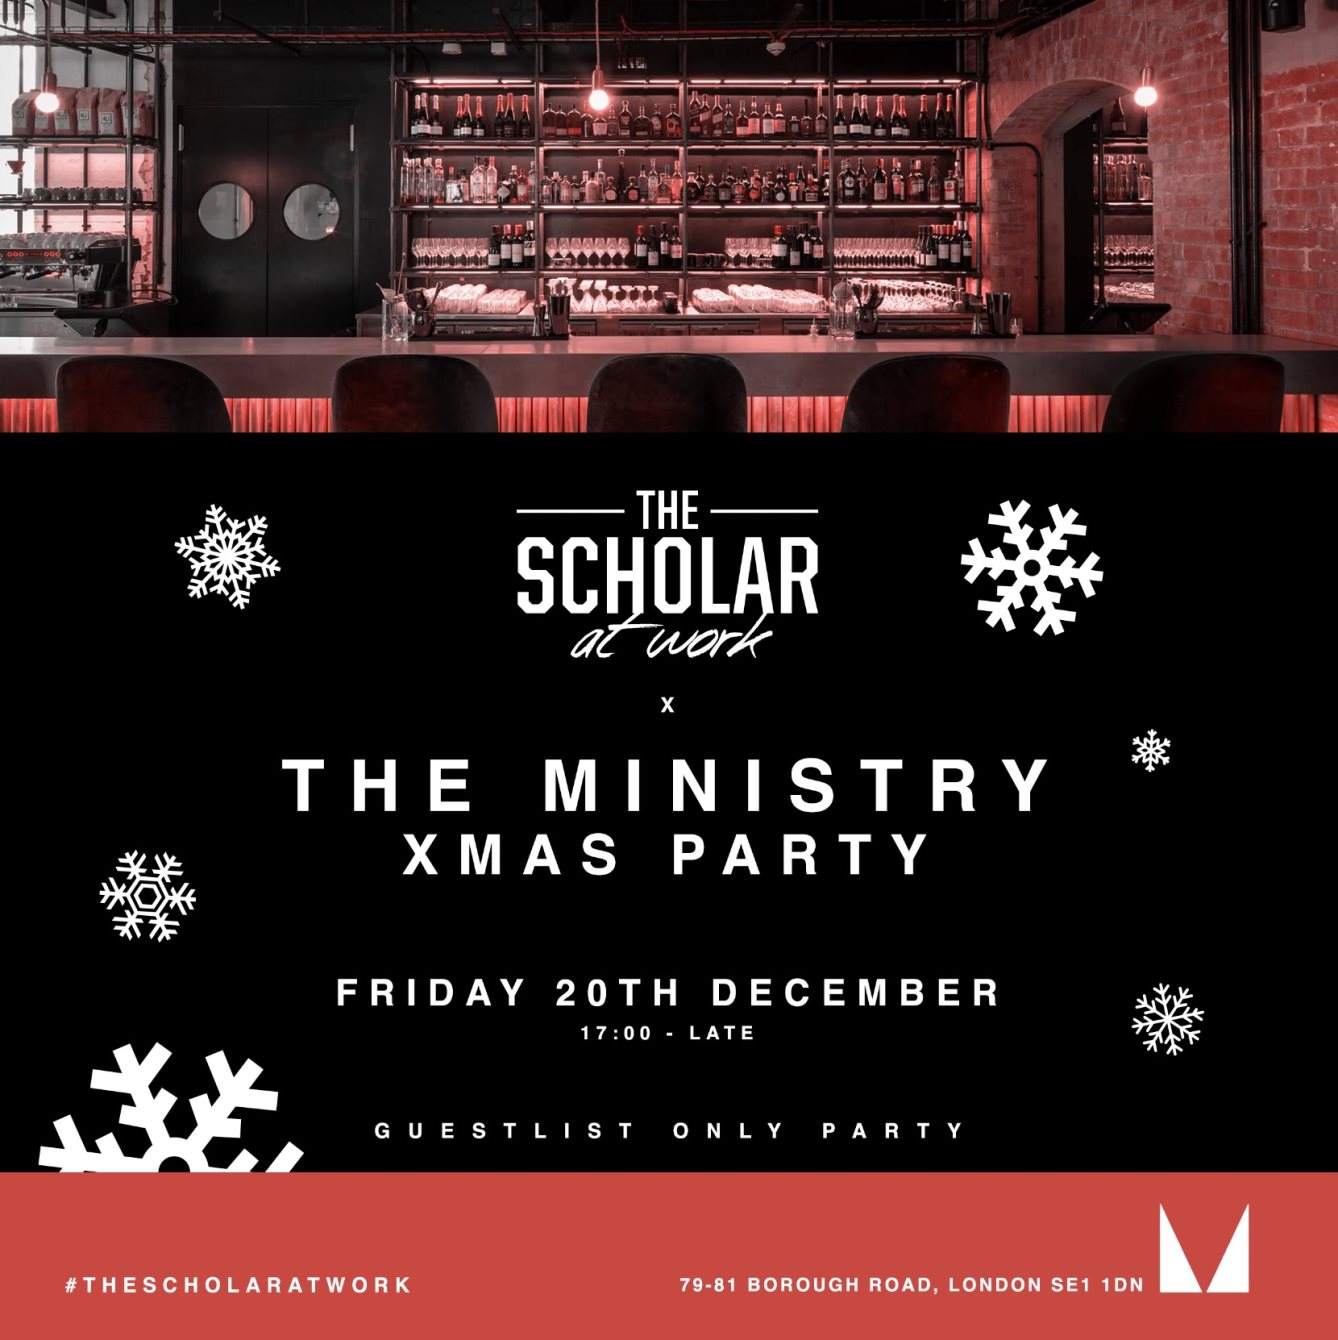 The Scholar At Work x The Ministry Xmas Party - フライヤー表